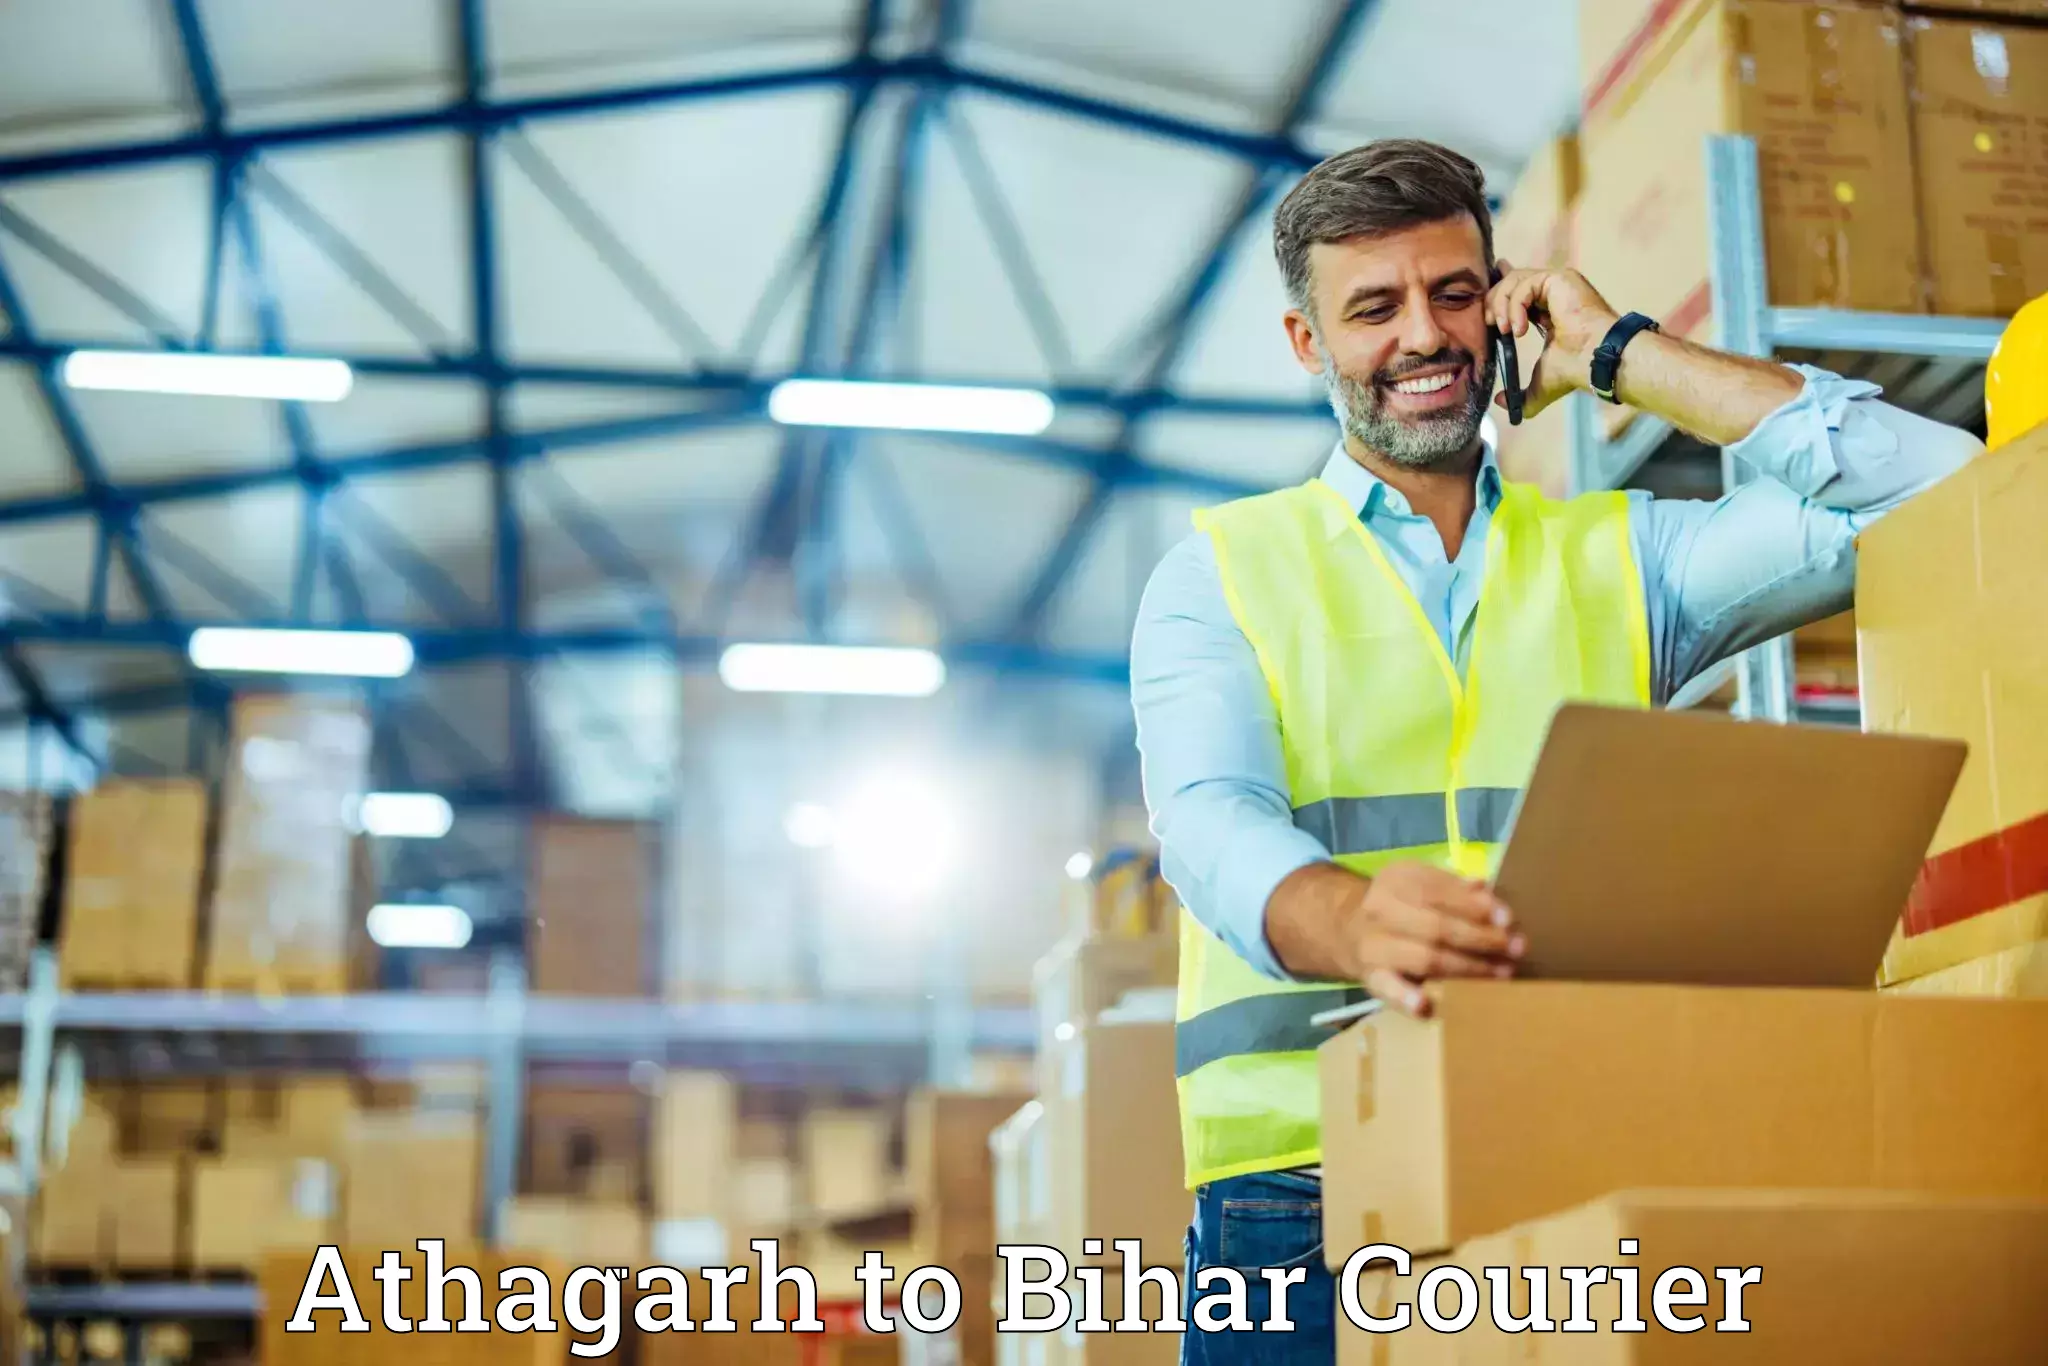 Full-service movers Athagarh to Bihar